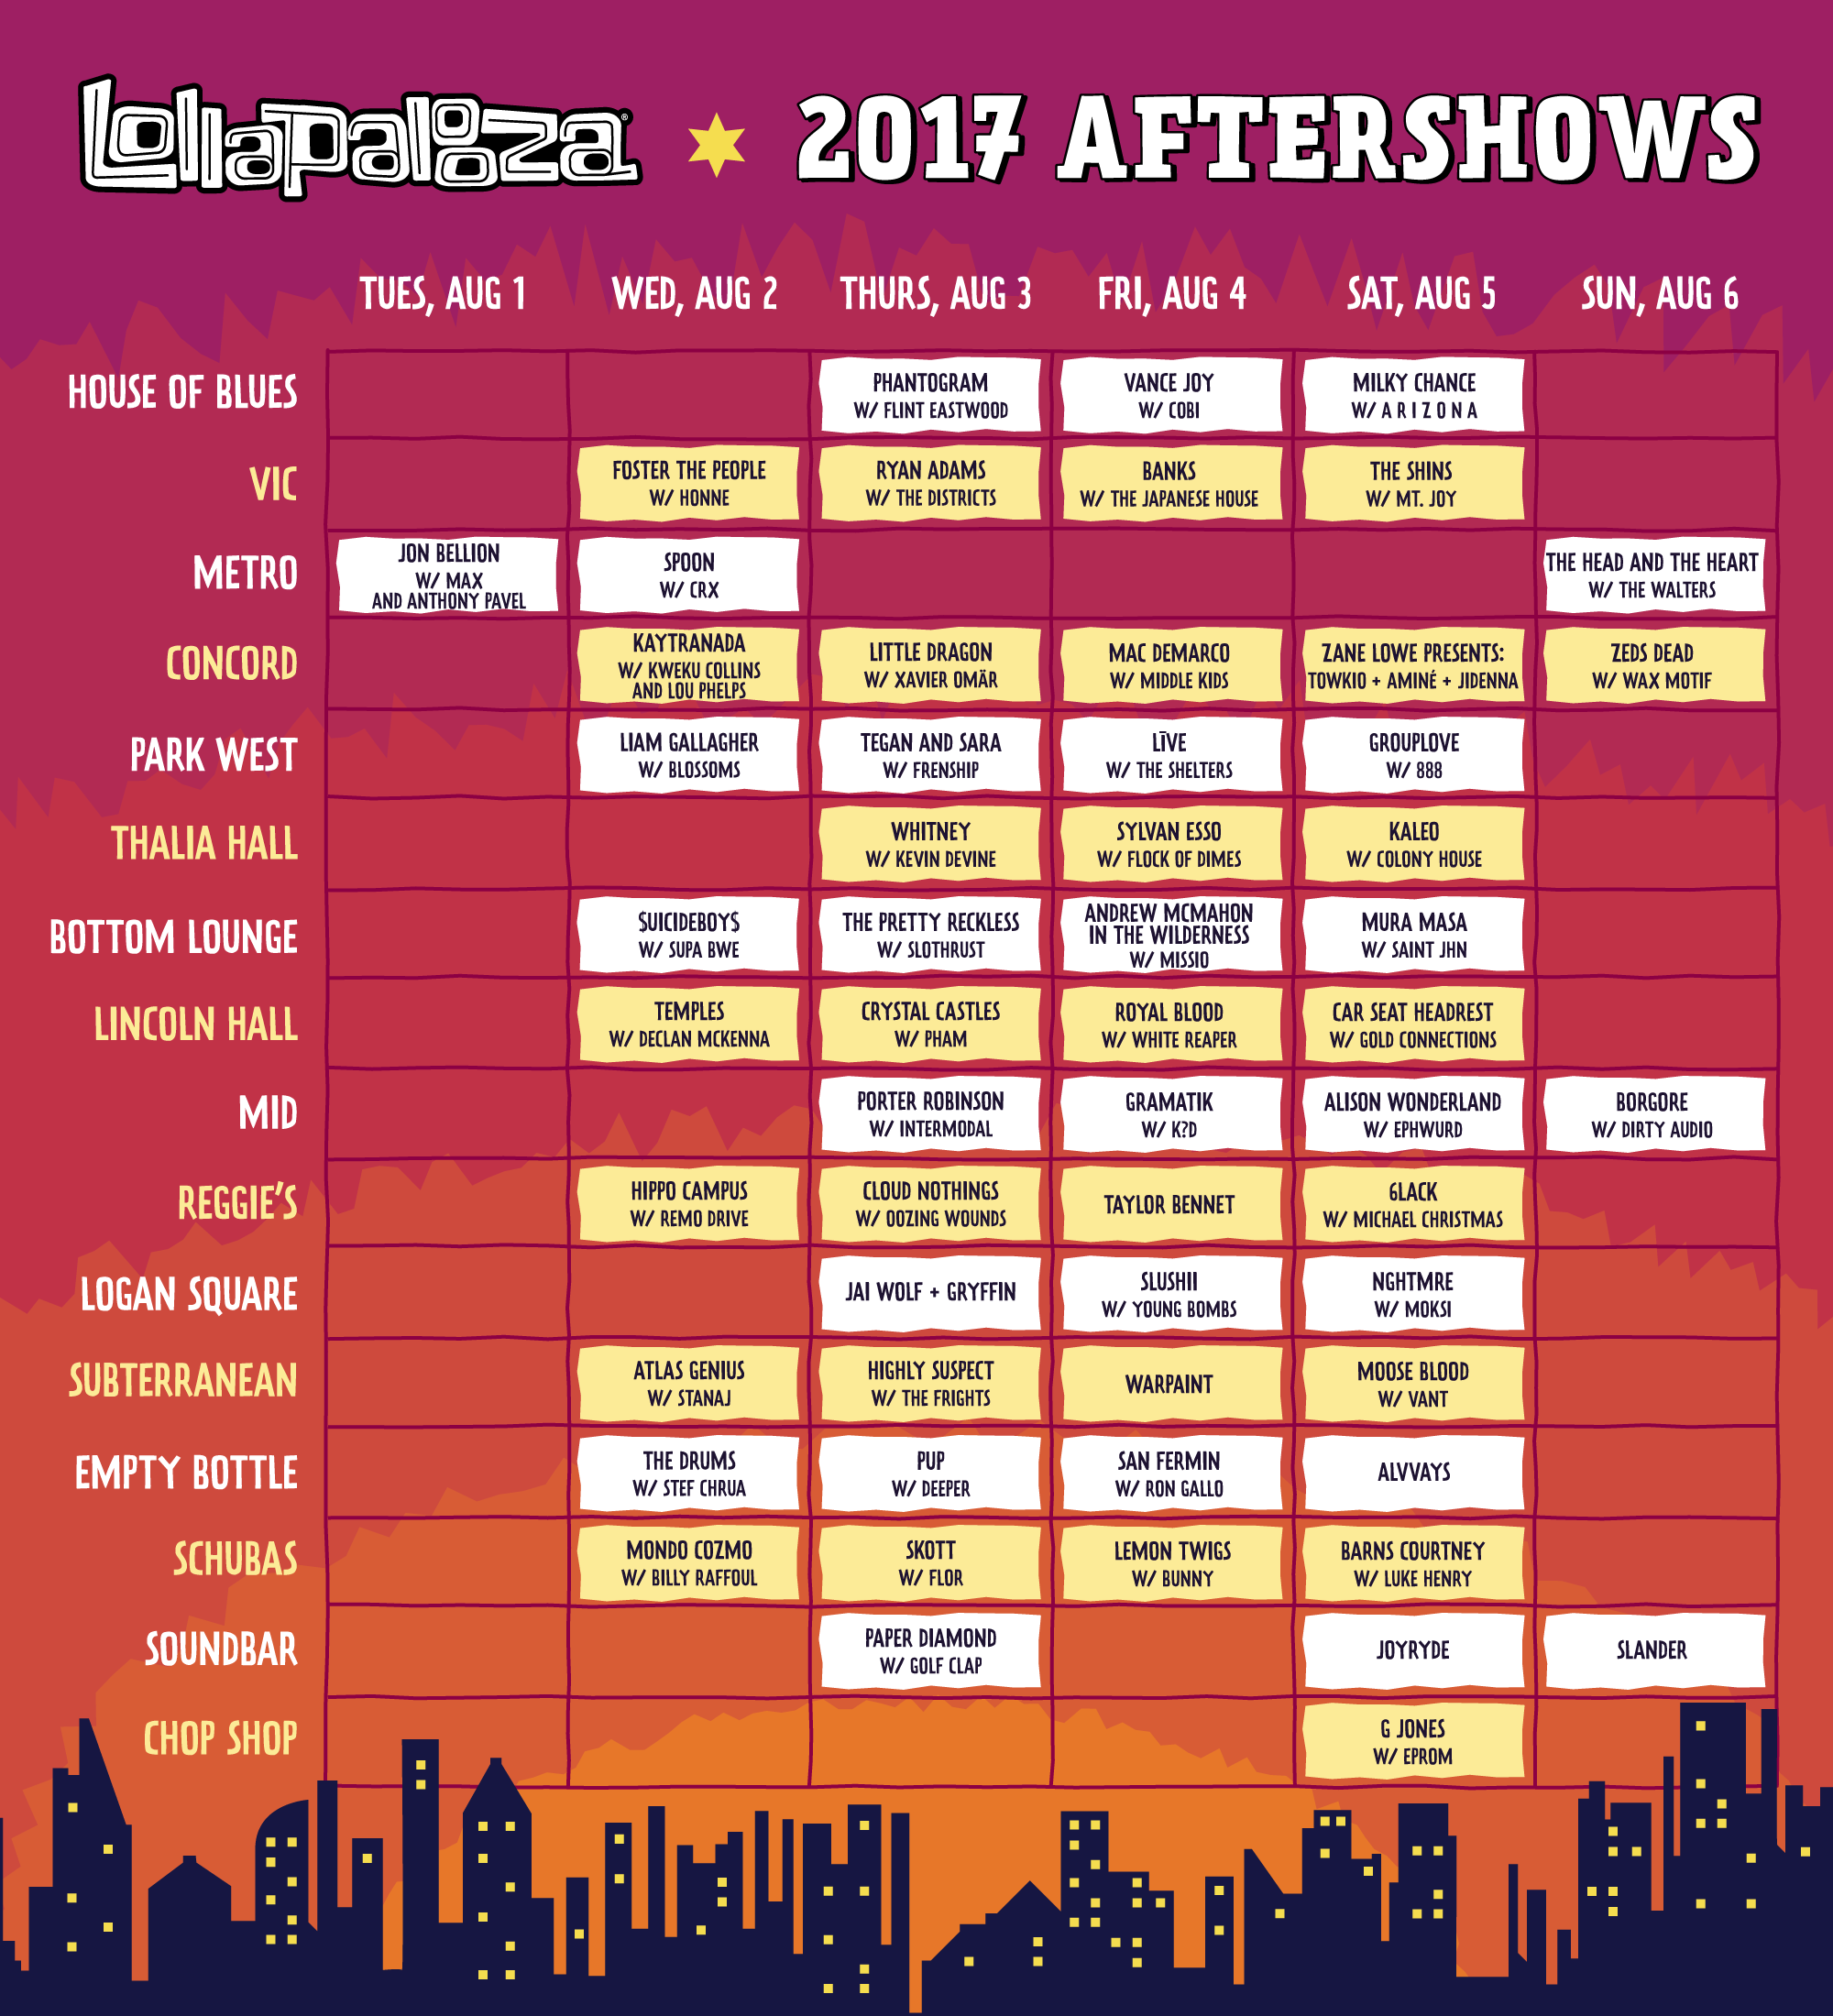 Lollapalooza 2017 Chicago aftershows. Photo by: Lollapalooza